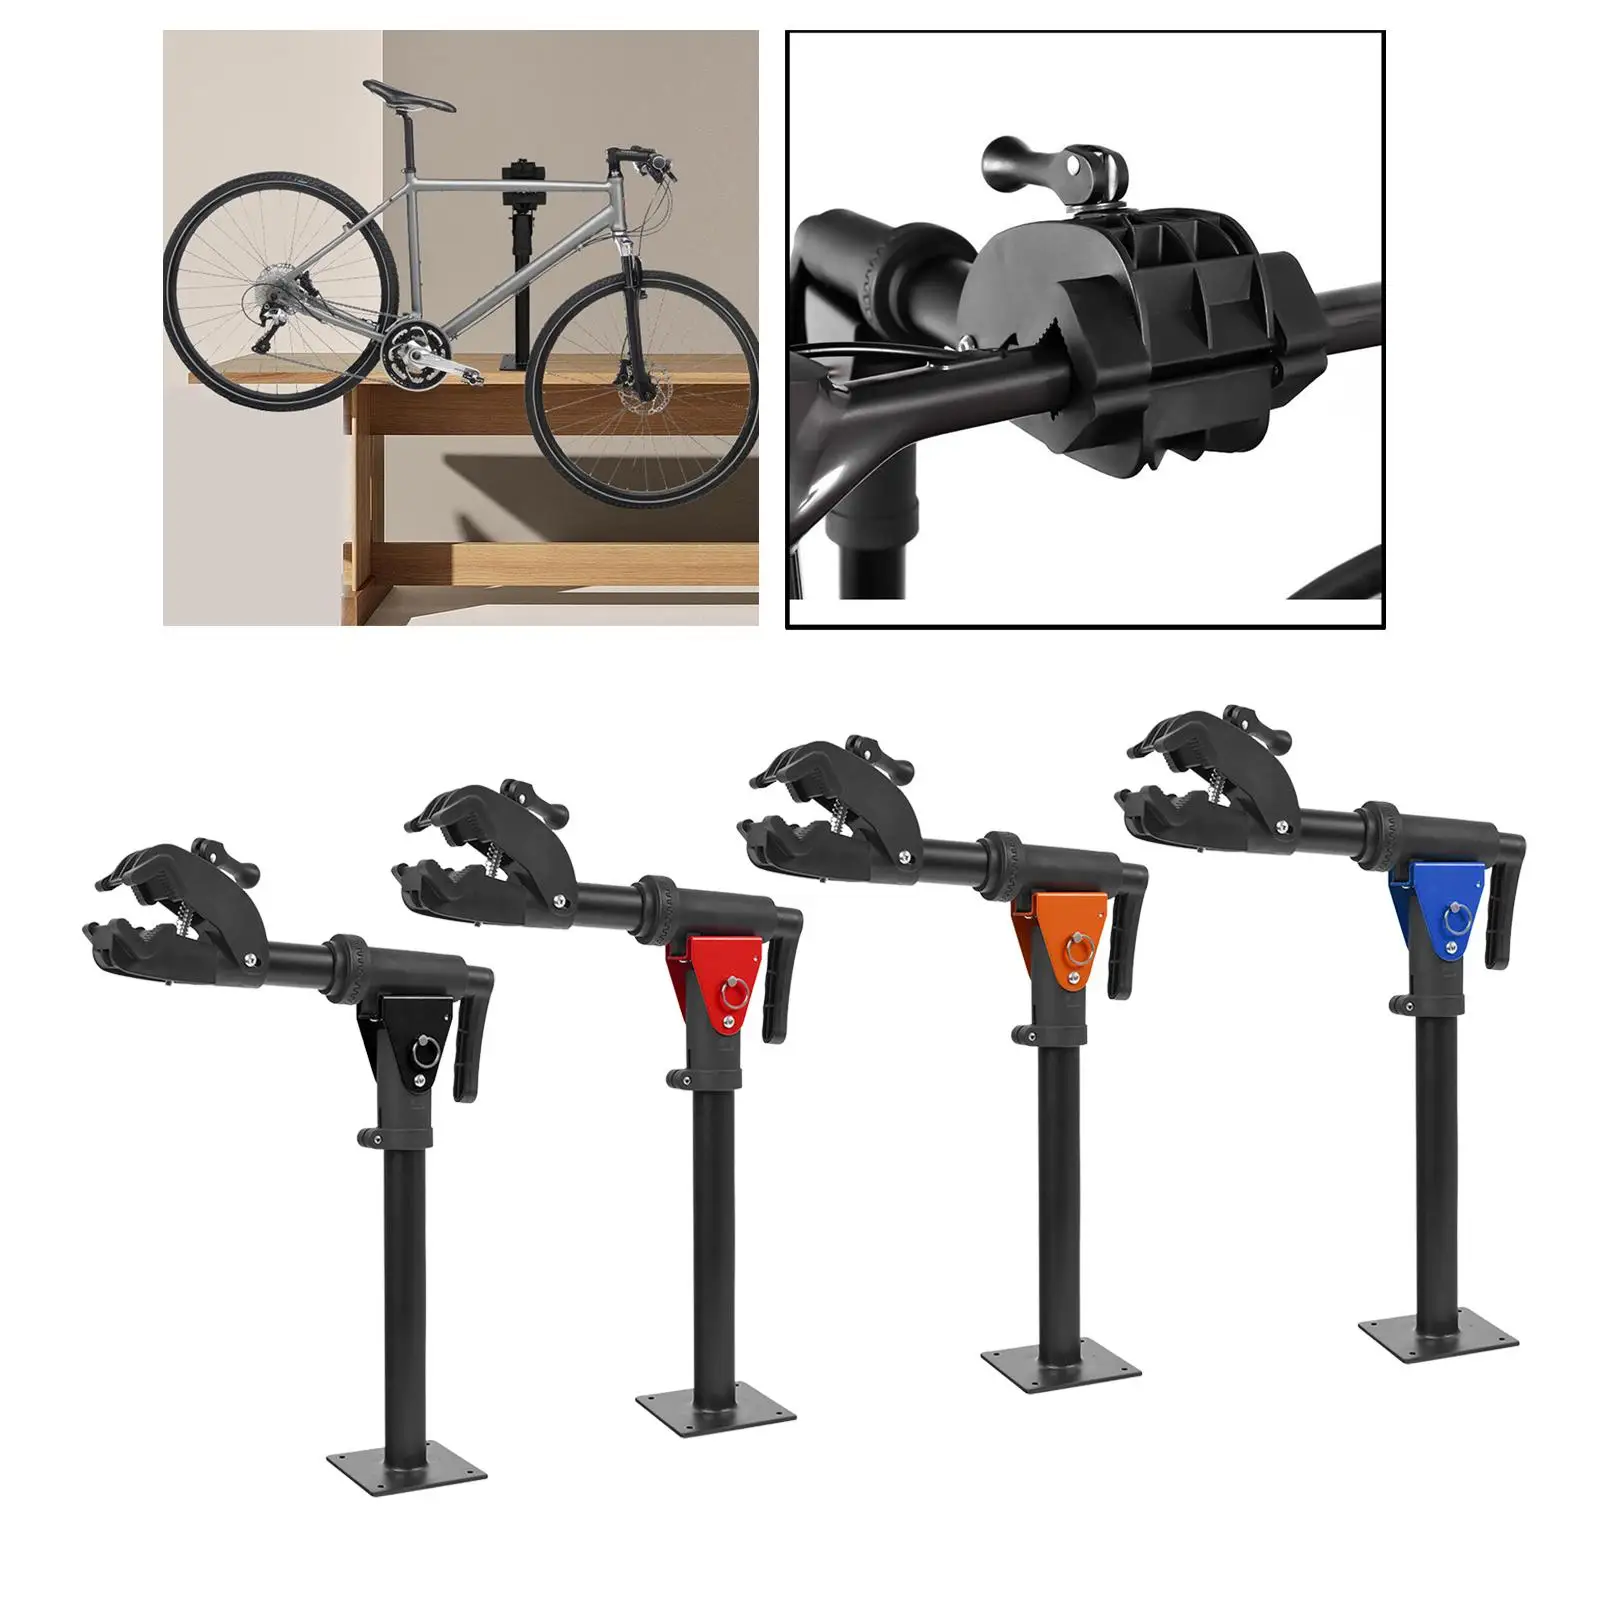 Bike Wall Mount Clamp Folding Bicycle Maintenance Rack Display Rack Hook 50Kg Loaded for Bench Mount with Quick Clamp Lever